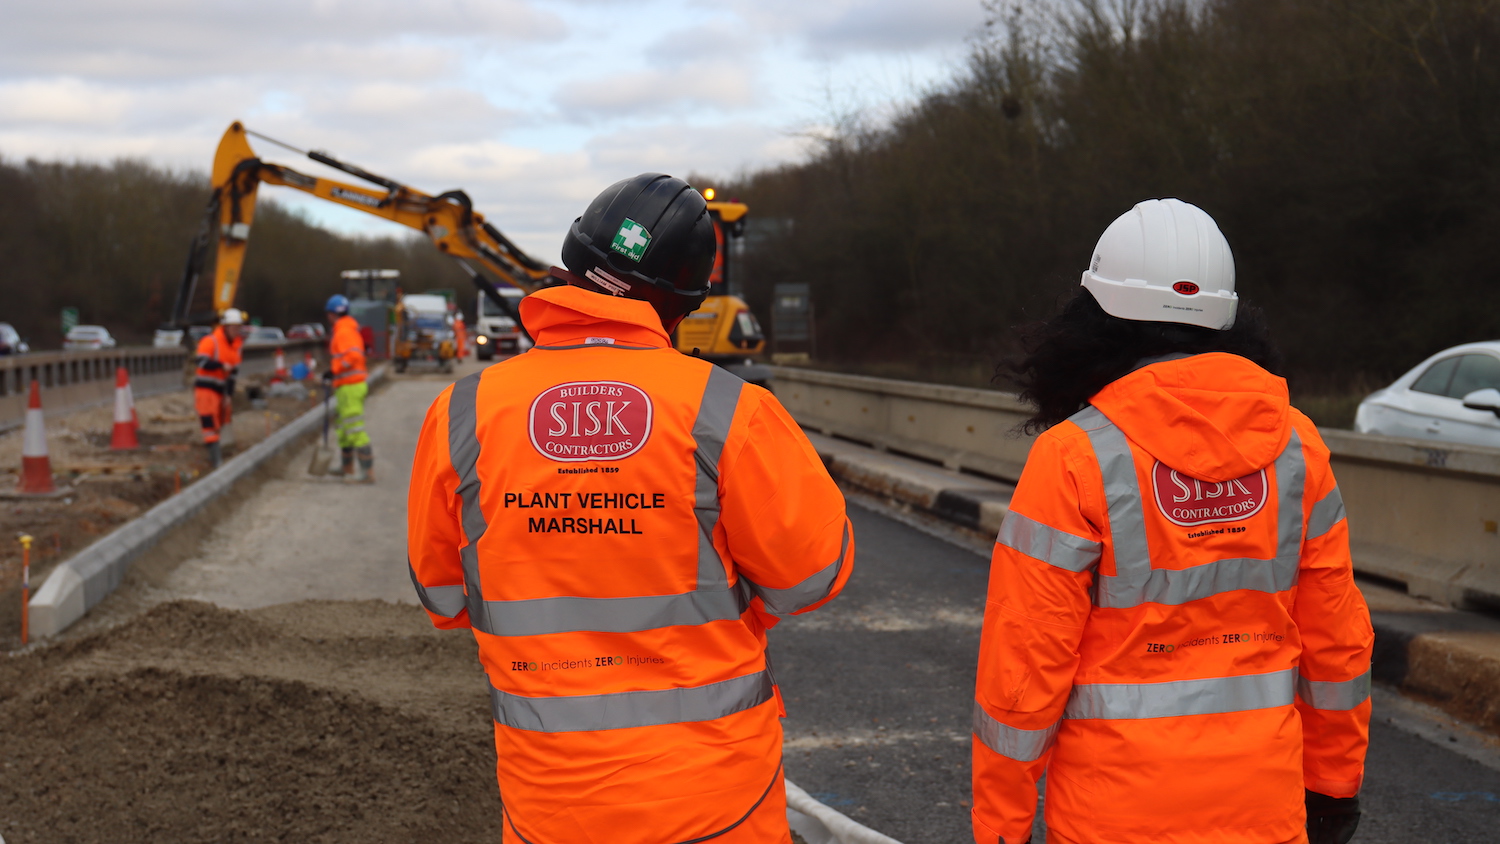 Photo of Sisk staff on site
Digital Innovation in Productivity